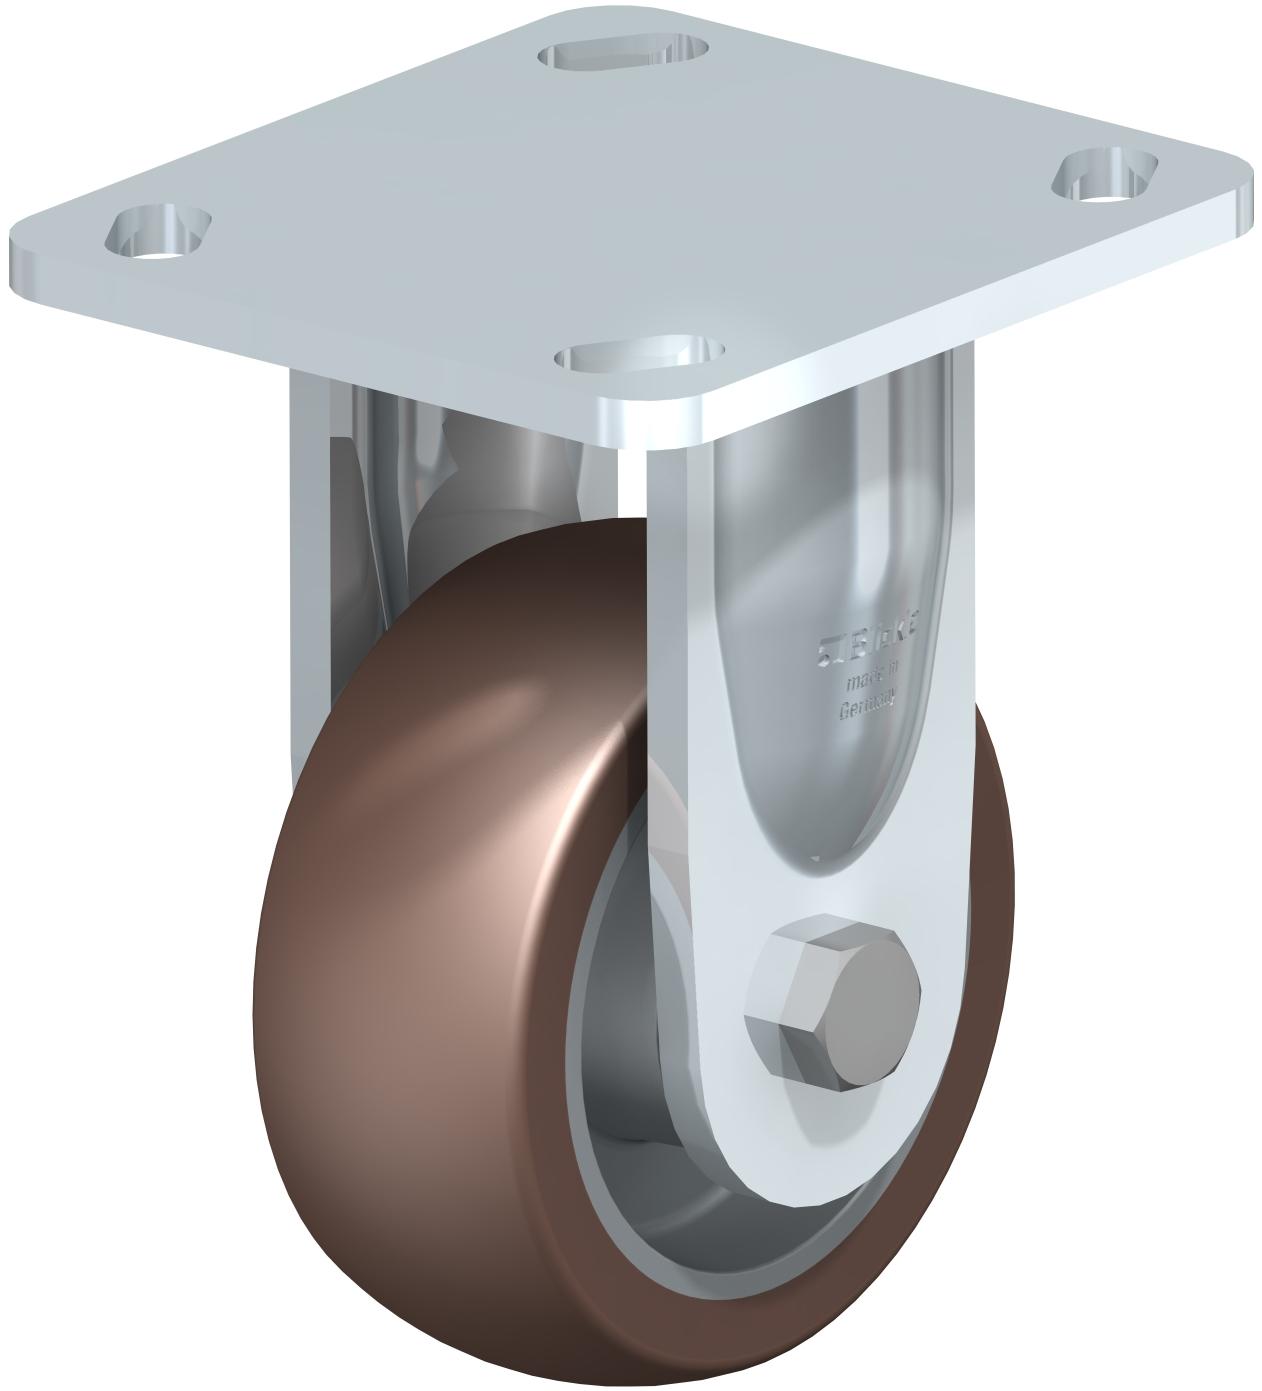 Heavy Duty Industrial Small Top Plate Casters -Rigid, Ball Bearing, Blickle Besthane Brown Polyurethane Tread On Aluminum Core Wheel